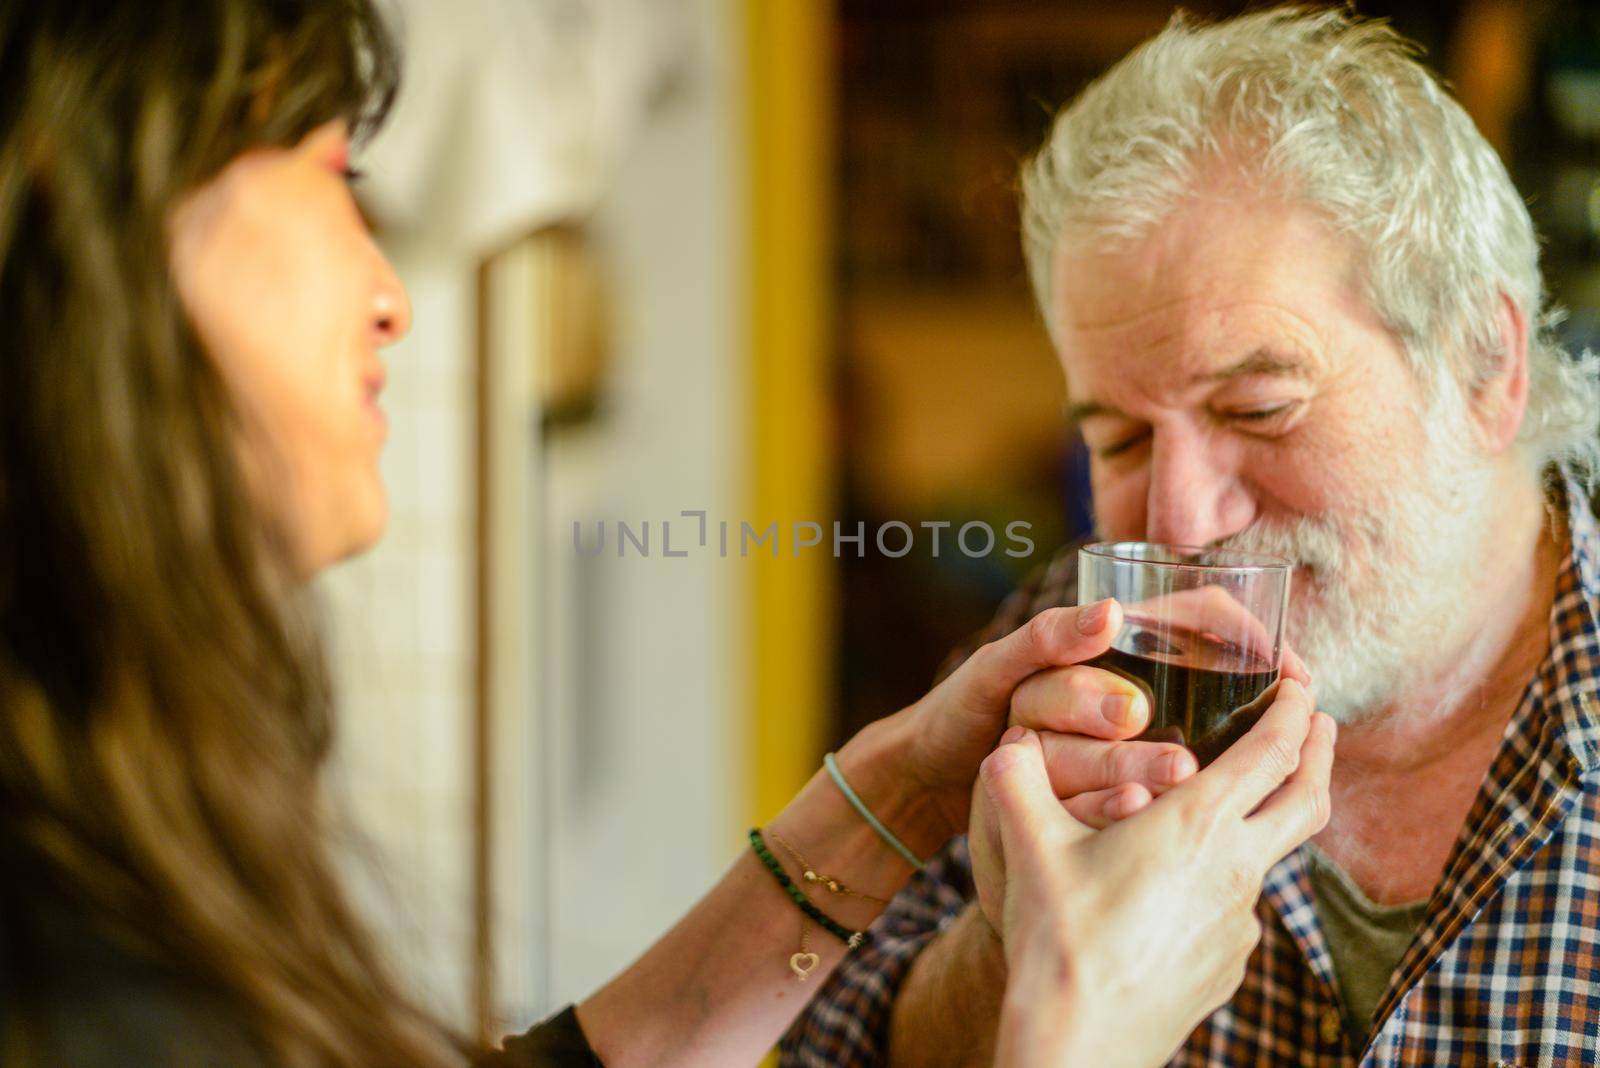 caucasian man drinking wine and getting drunk harassing young hispanic woman wife - alcoholism and domestic violence concept. High quality photocaucasian man drinking wine and getting drunk harassing young hispanic woman wife - alcoholism and domestic violence concept